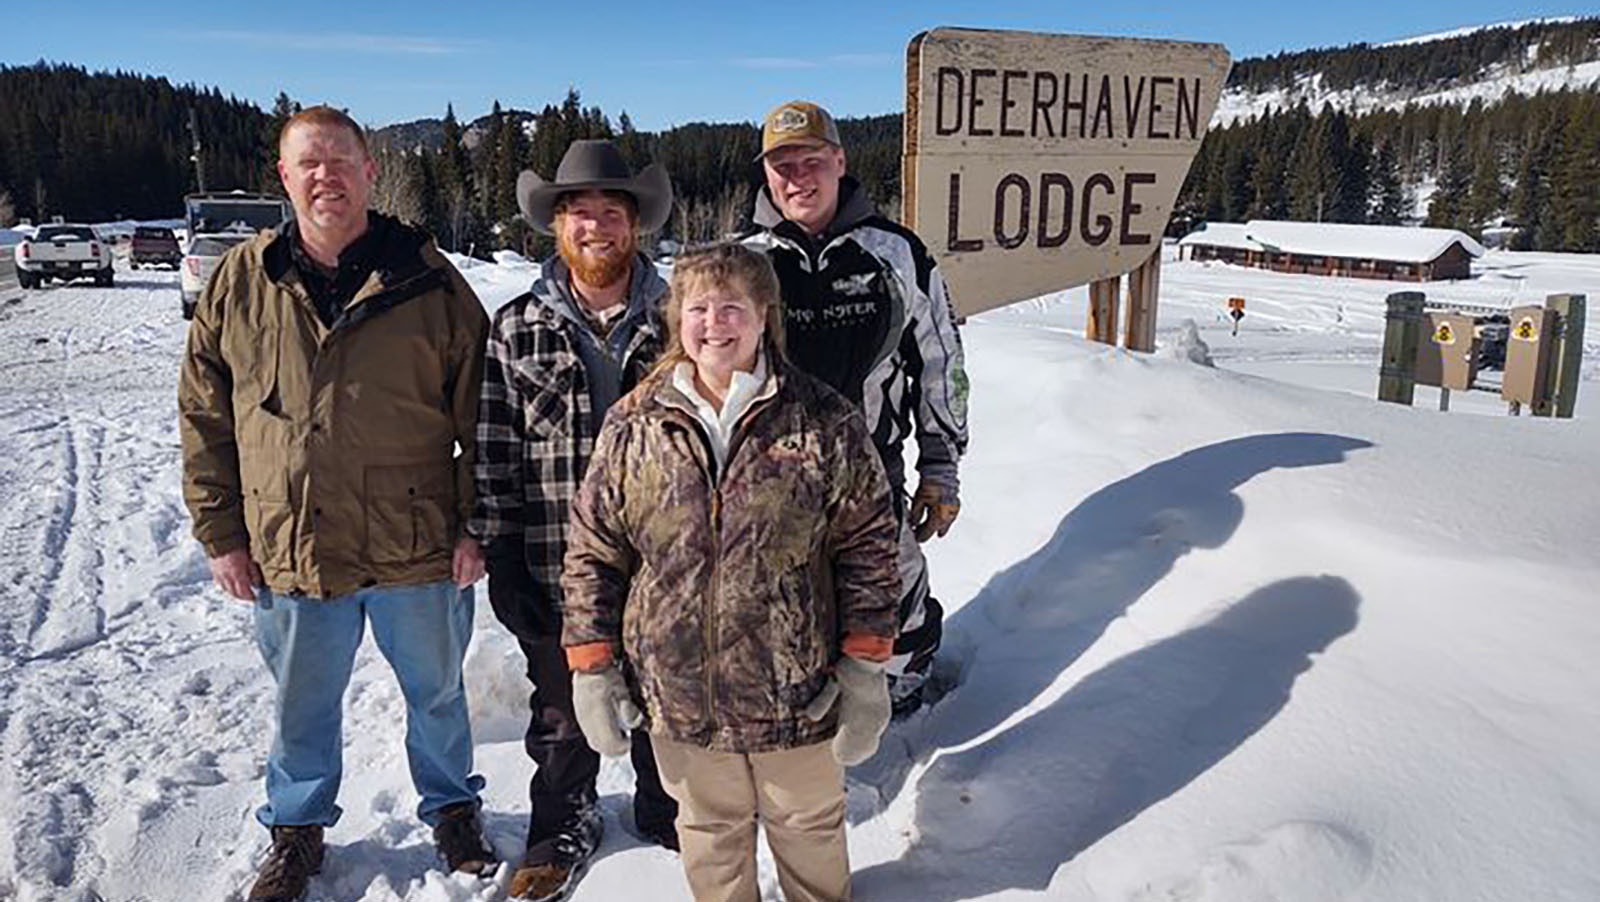 Minnesota residents Clint and Amy Wittlief, along with their sons Wyatt and Eric, bought the Deer Haven Lodge near Teen Sleep and are refurbishing it for a Jan. 1, 2024, reopening.